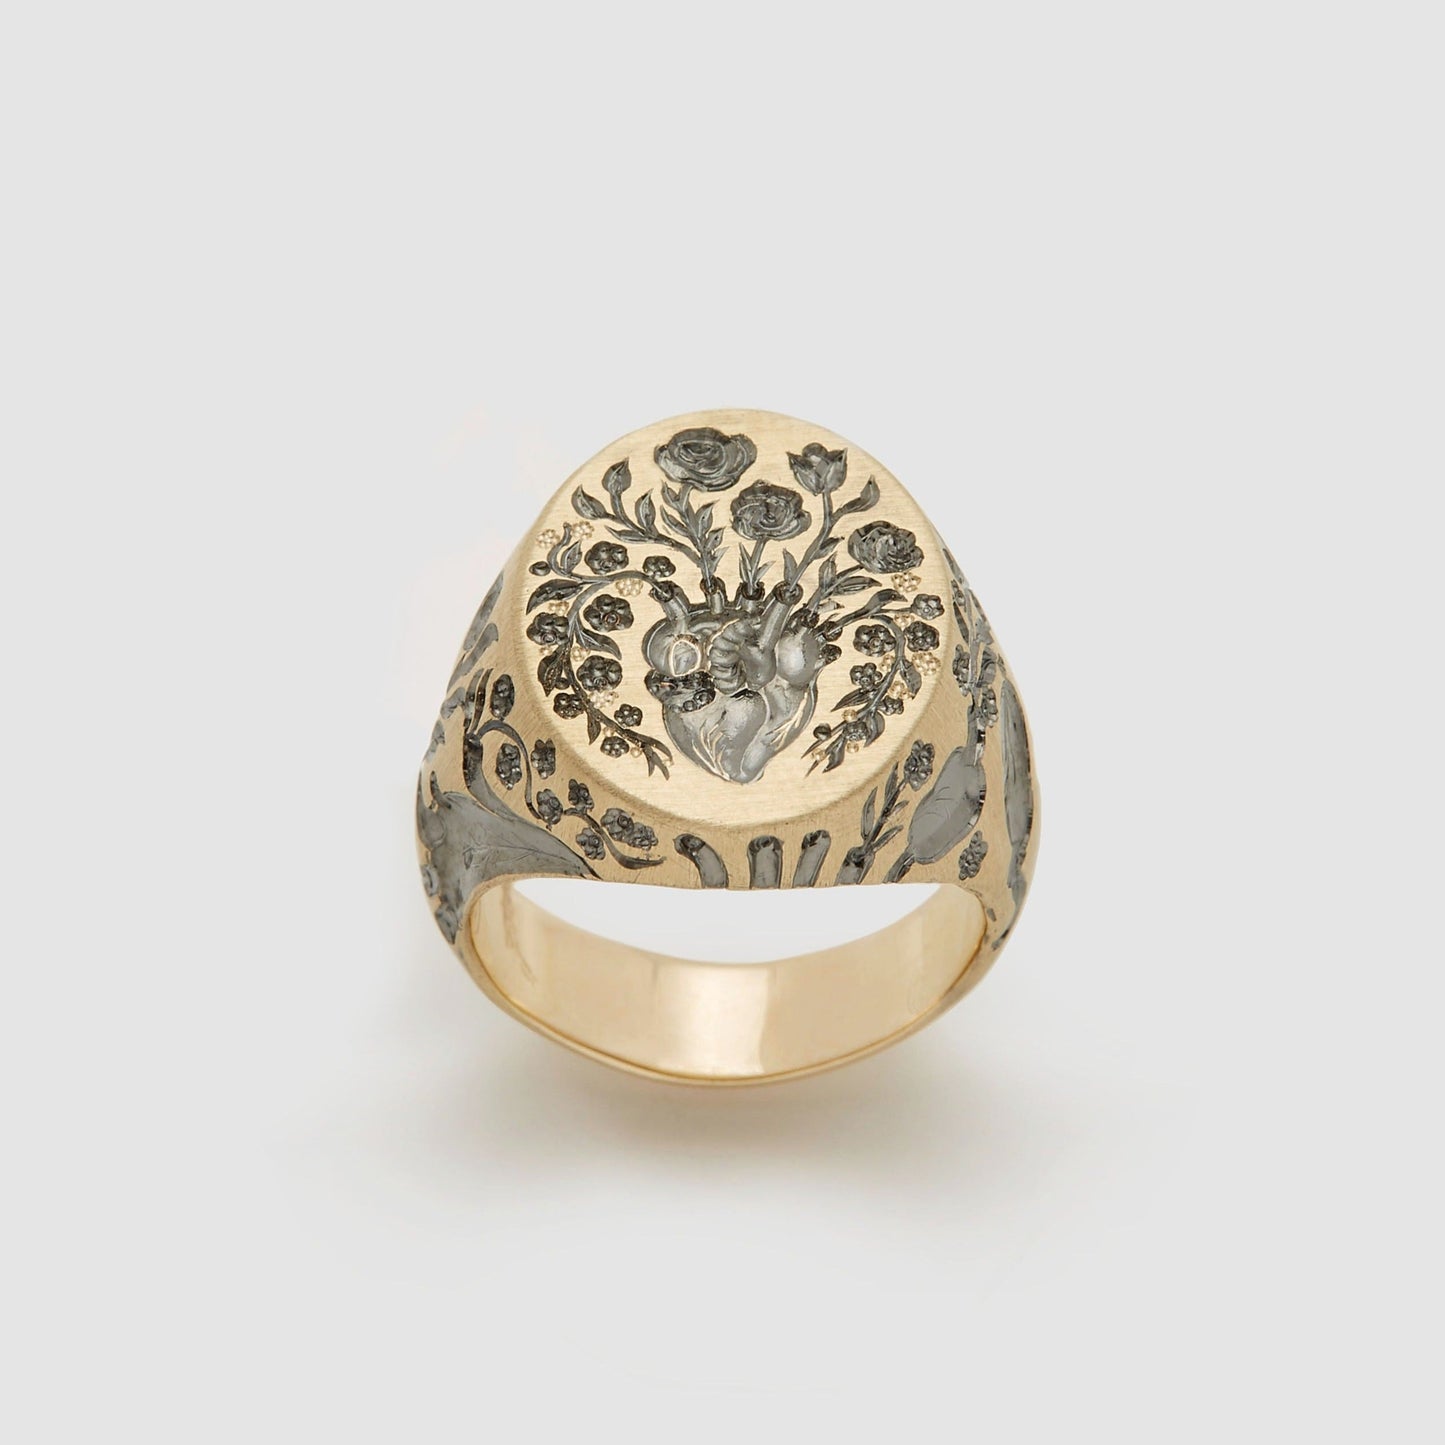 Castro Smith Jewelry Gold Anatomical Heart Signet Ring with Gray Engravings.